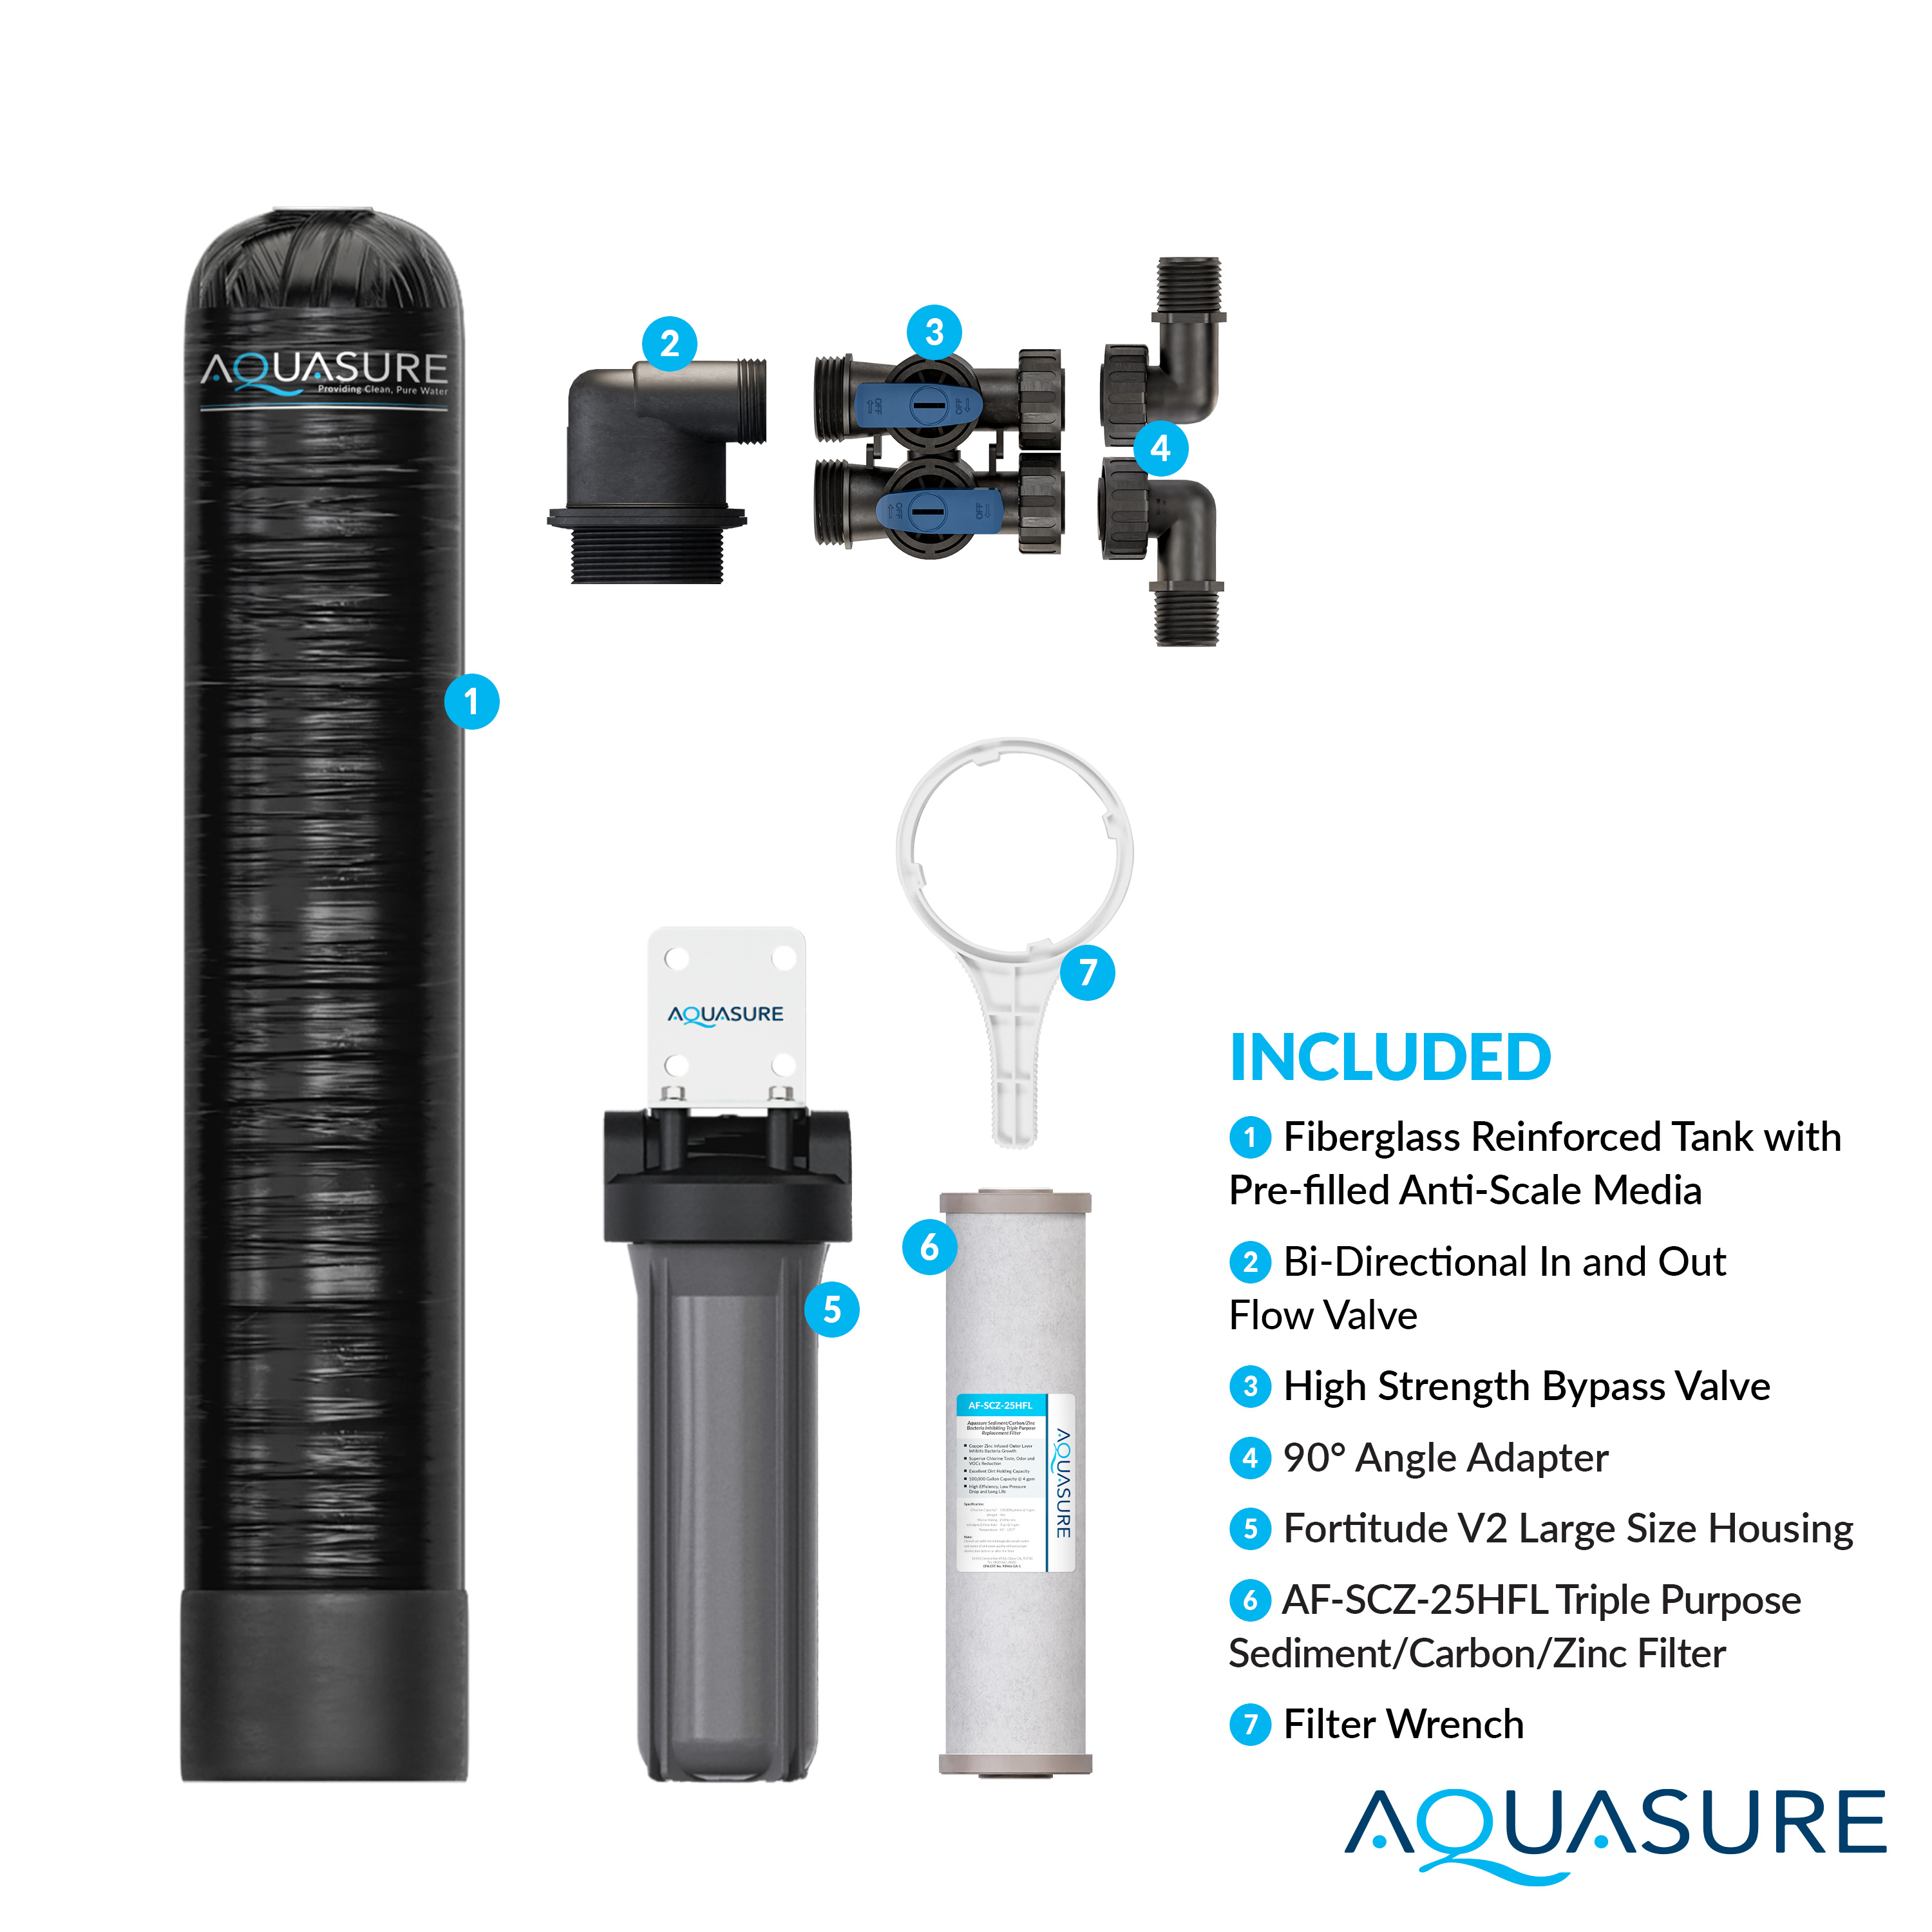 Aquasure Serene Series 10 GPM Whole House Salt-Free Water Conditioning/Softening System with Triple Purpose Pre-Filter